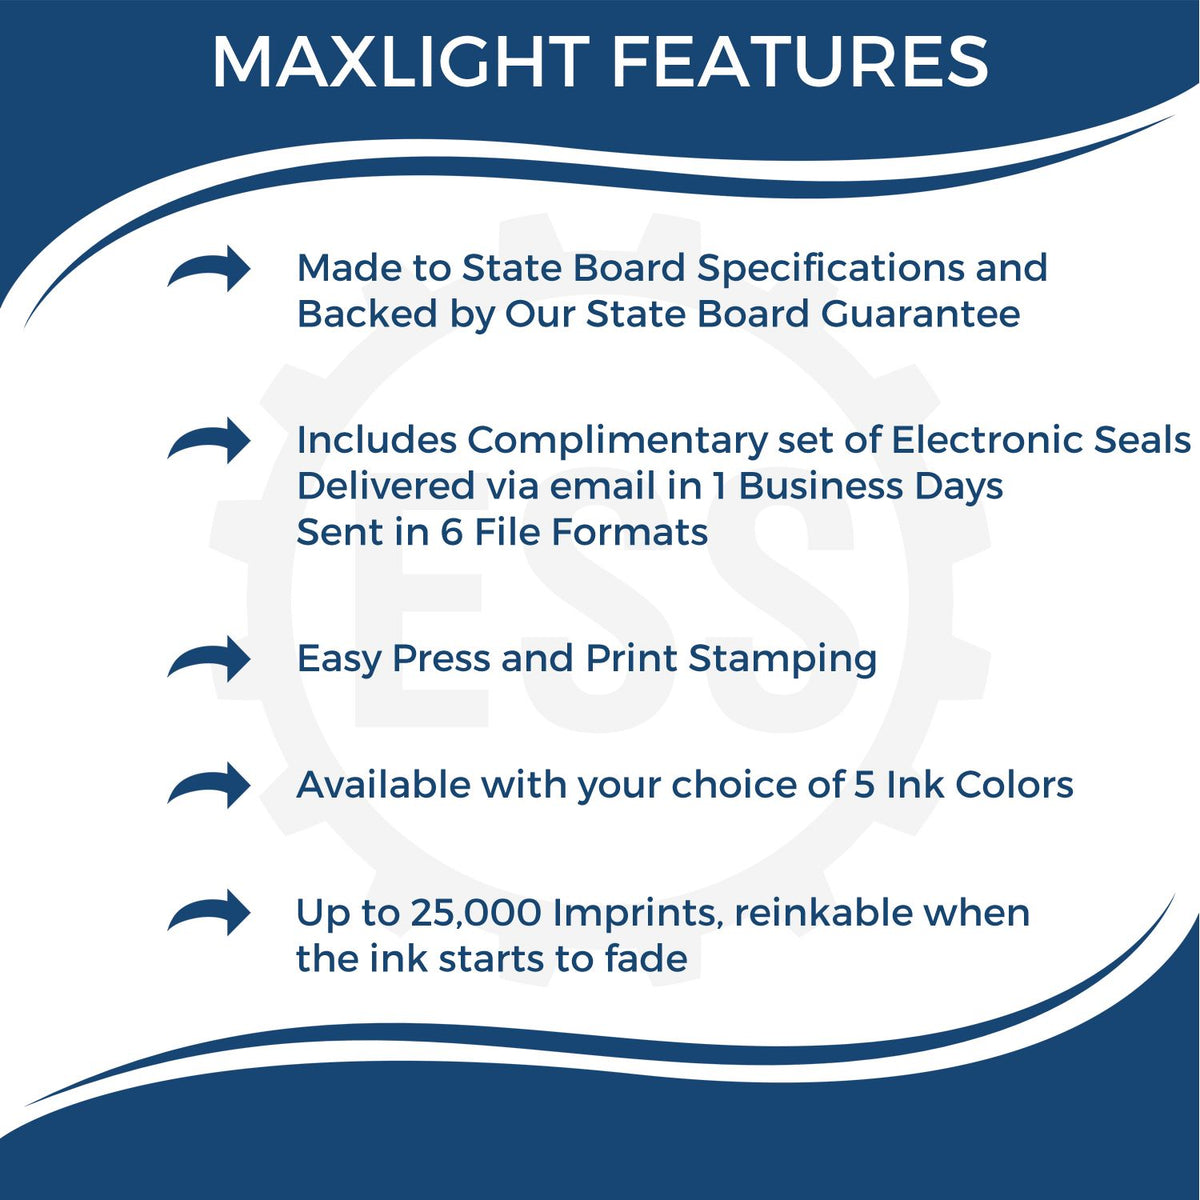 A picture of an infographic highlighting the selling points for the Premium MaxLight Pre-Inked Oklahoma Engineering Stamp